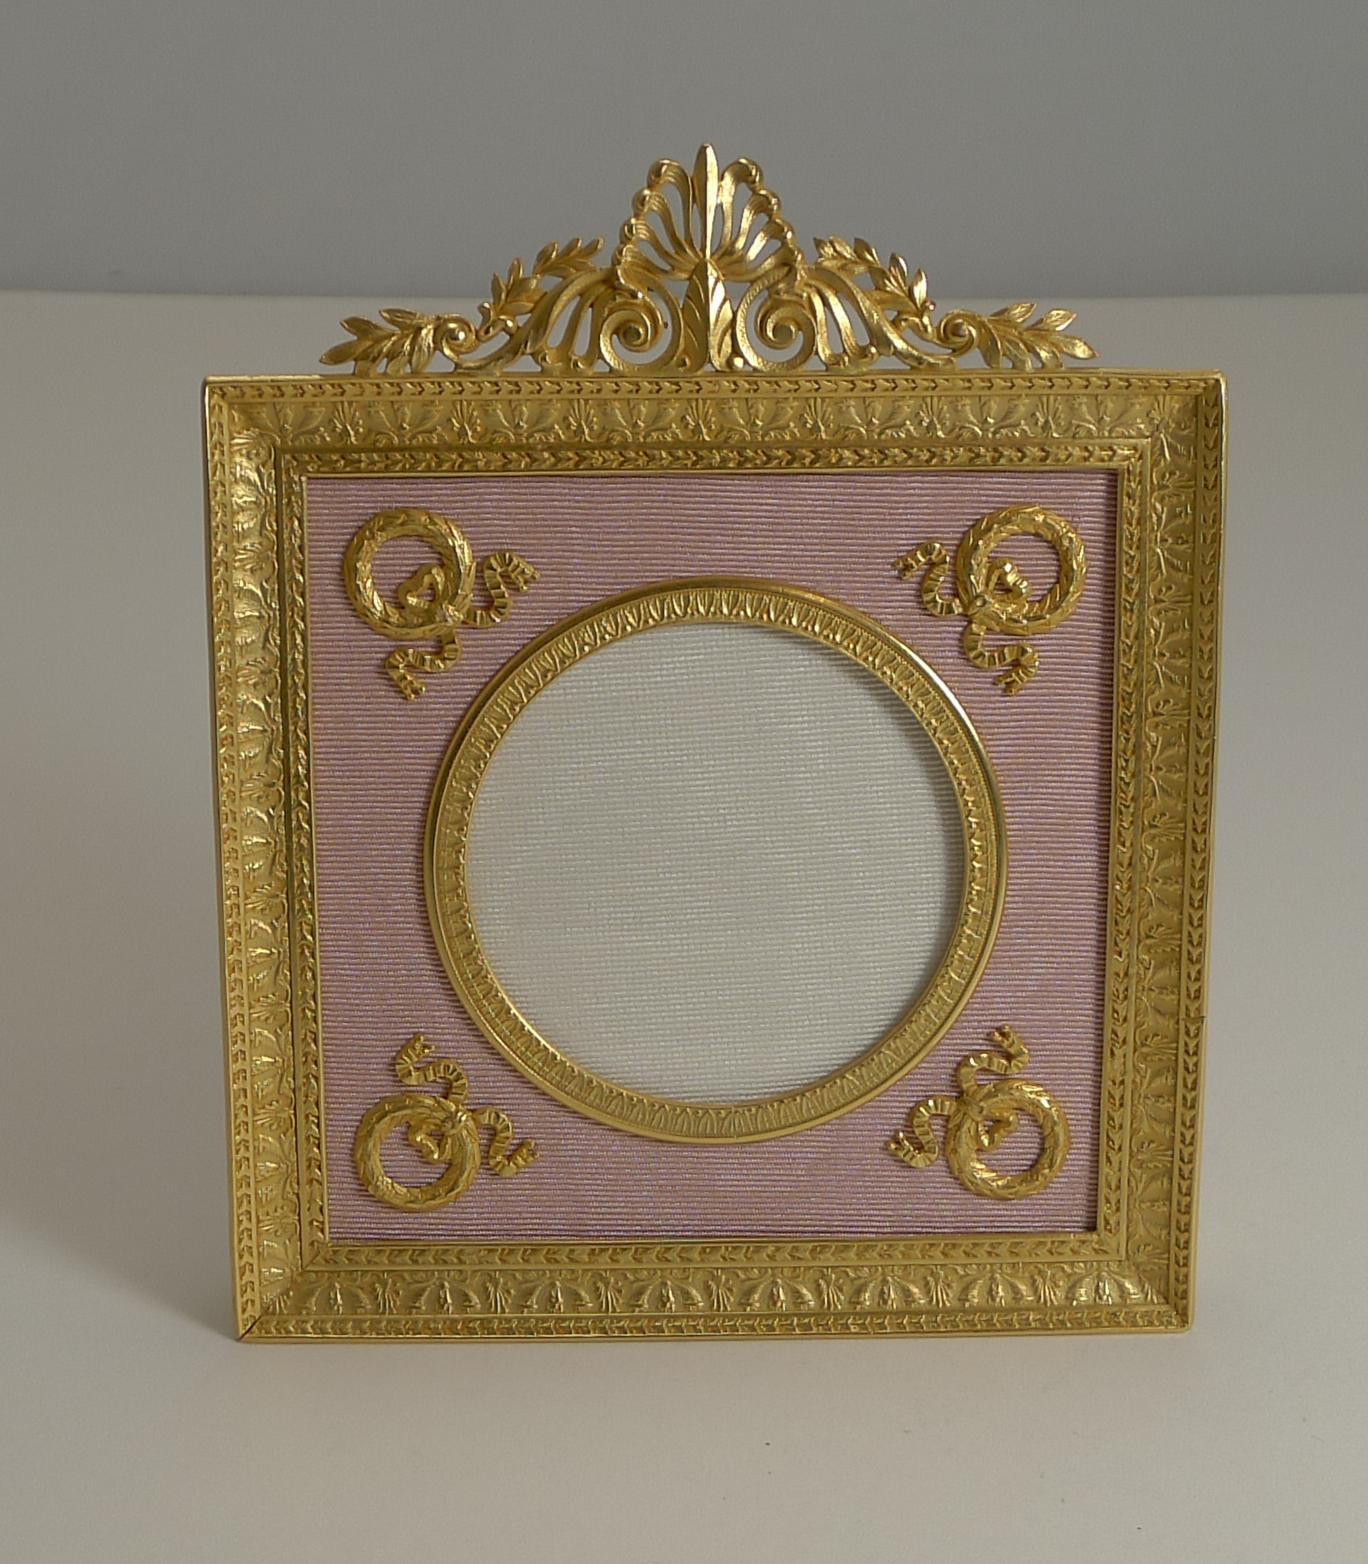 A fabulous late 19th-early 20th century photograph frame, French in origin and made from Ormolu, gold over bronze.

The circular aperture is surrounded by four gilded wreathes mounted on a pink taffeta.

Dating to circa 1900, it remains in